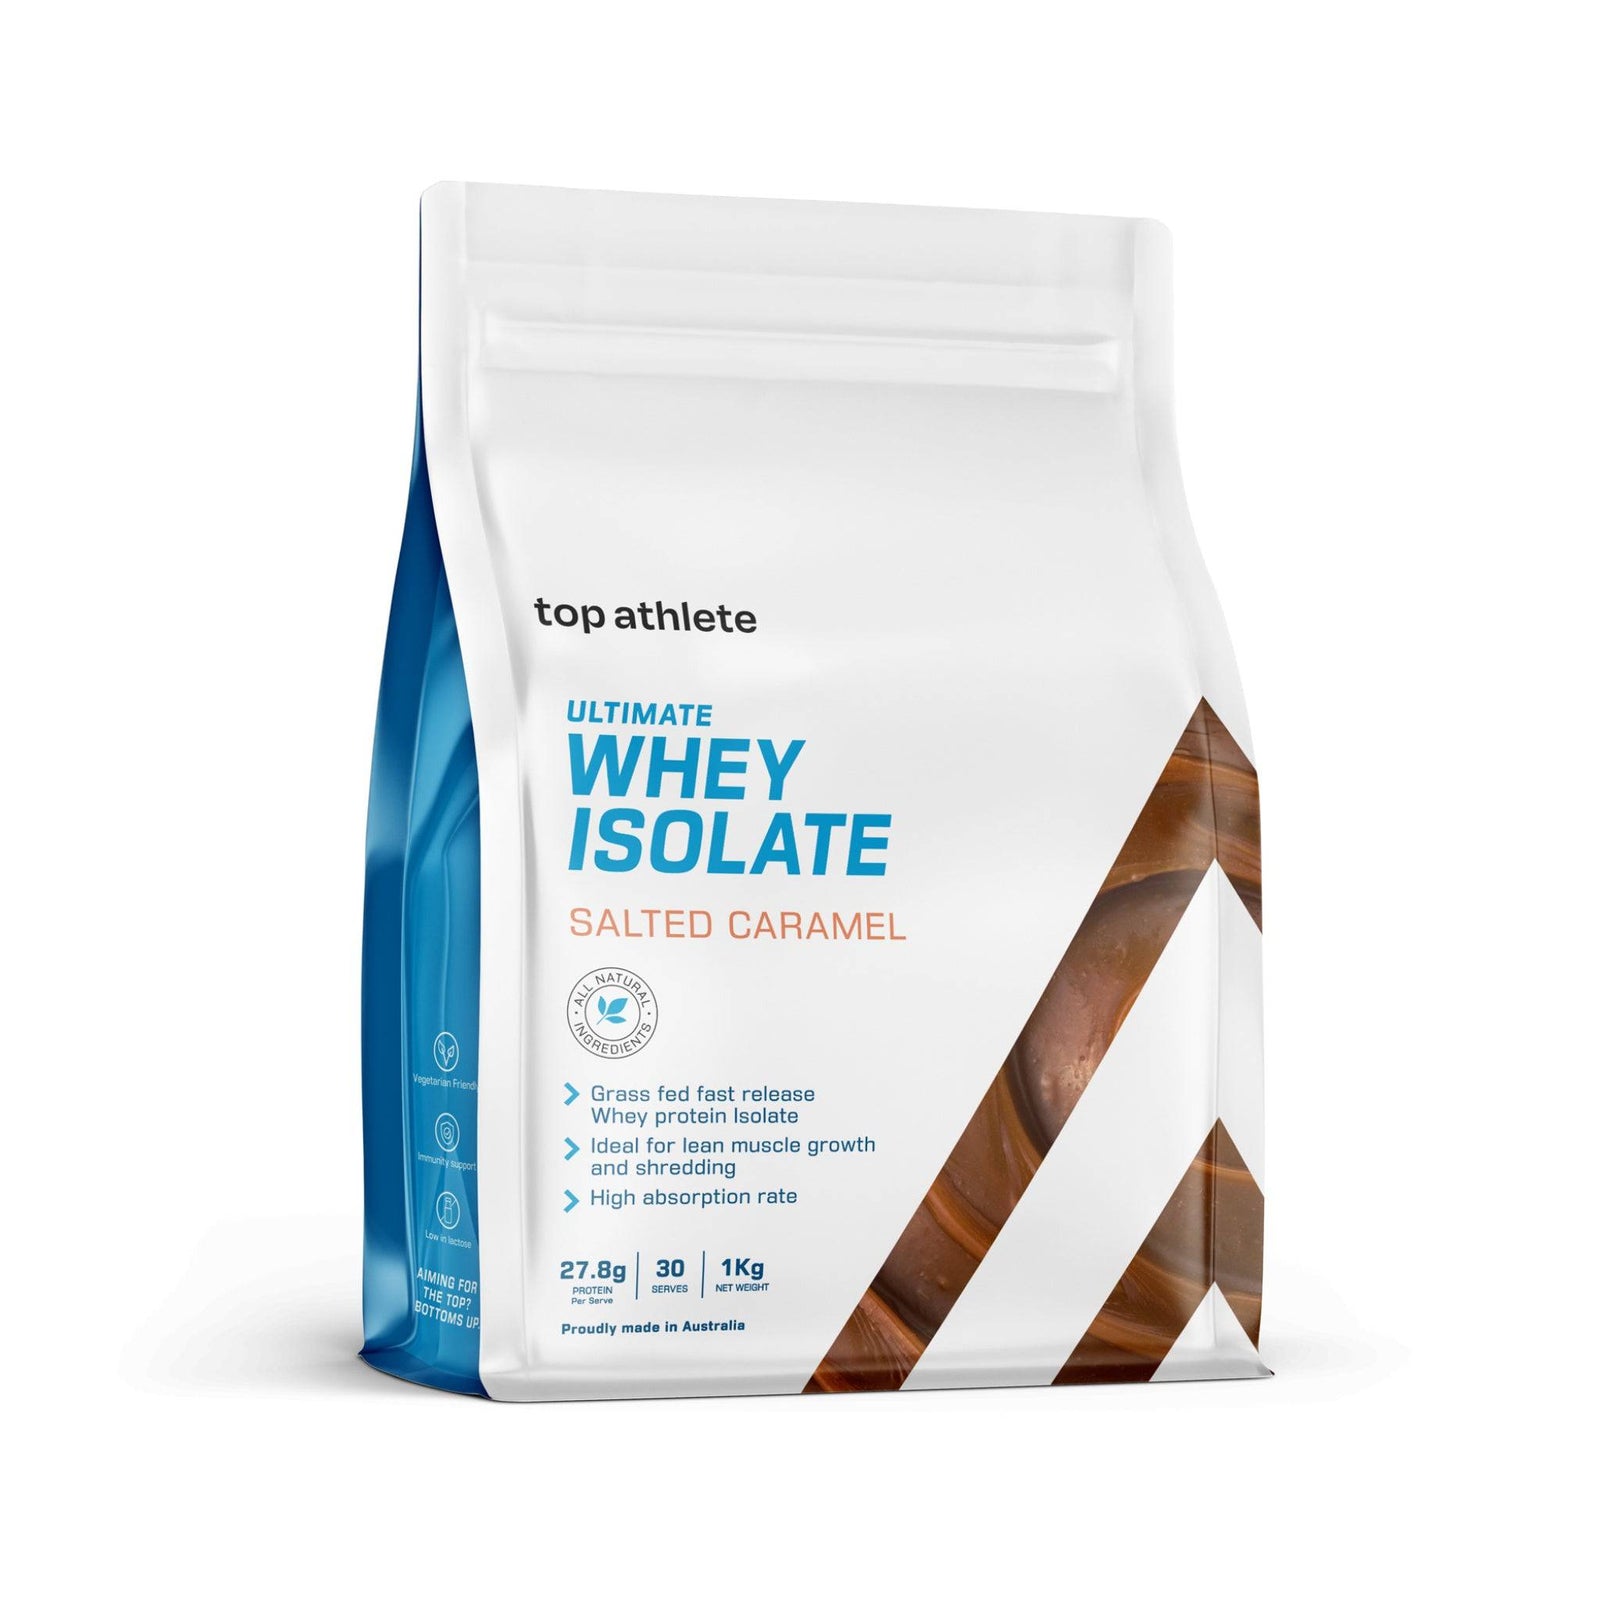 Ultimate Whey Isolate Salted Caramel